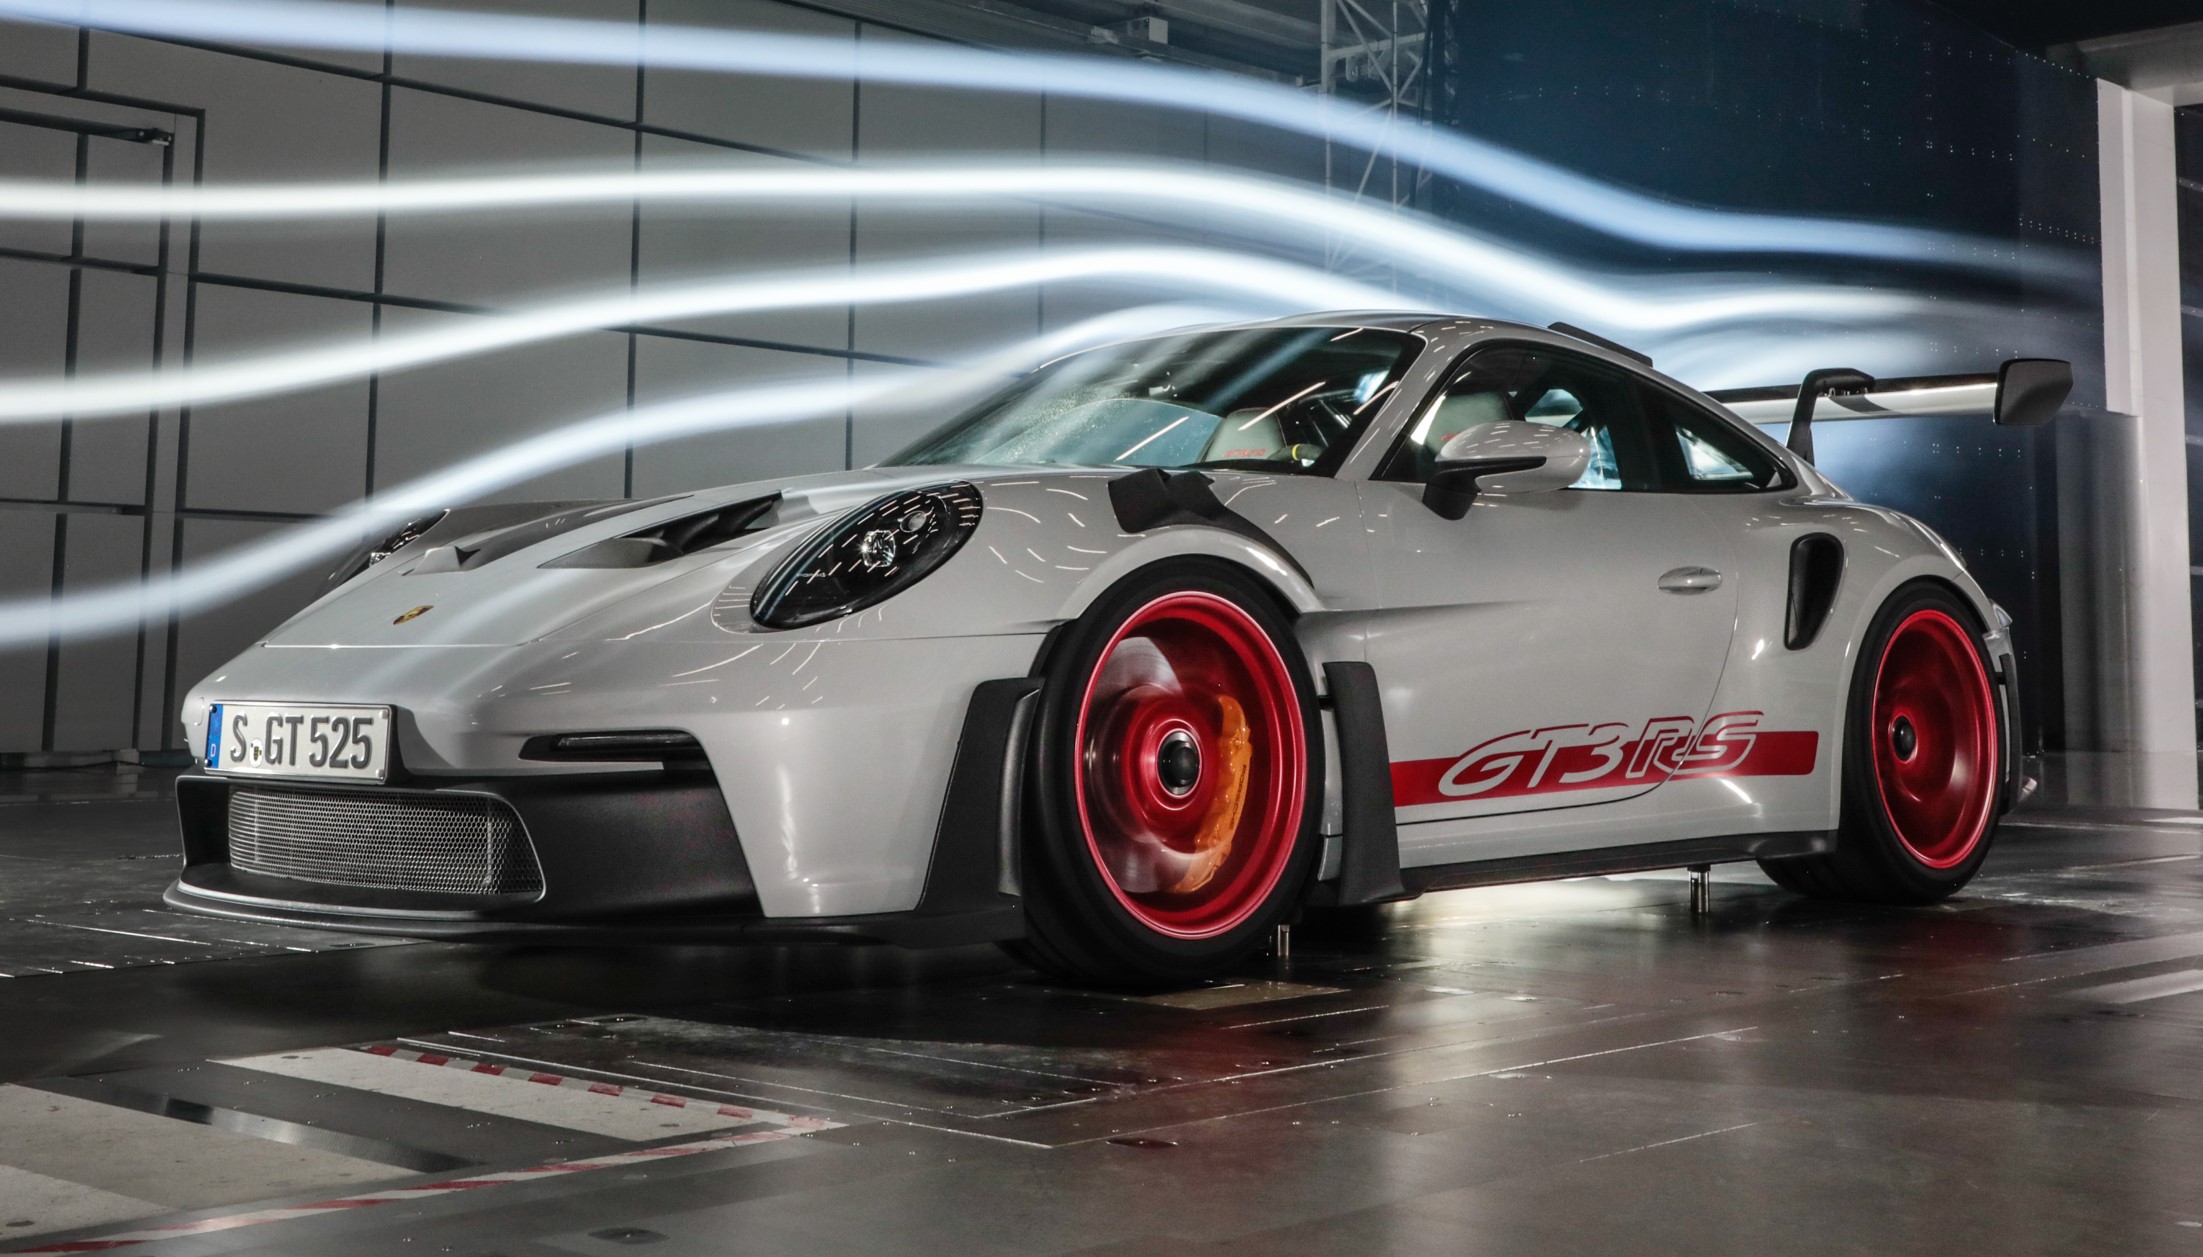 aria-label="Porsche 911 GT3 RS white and red 2"